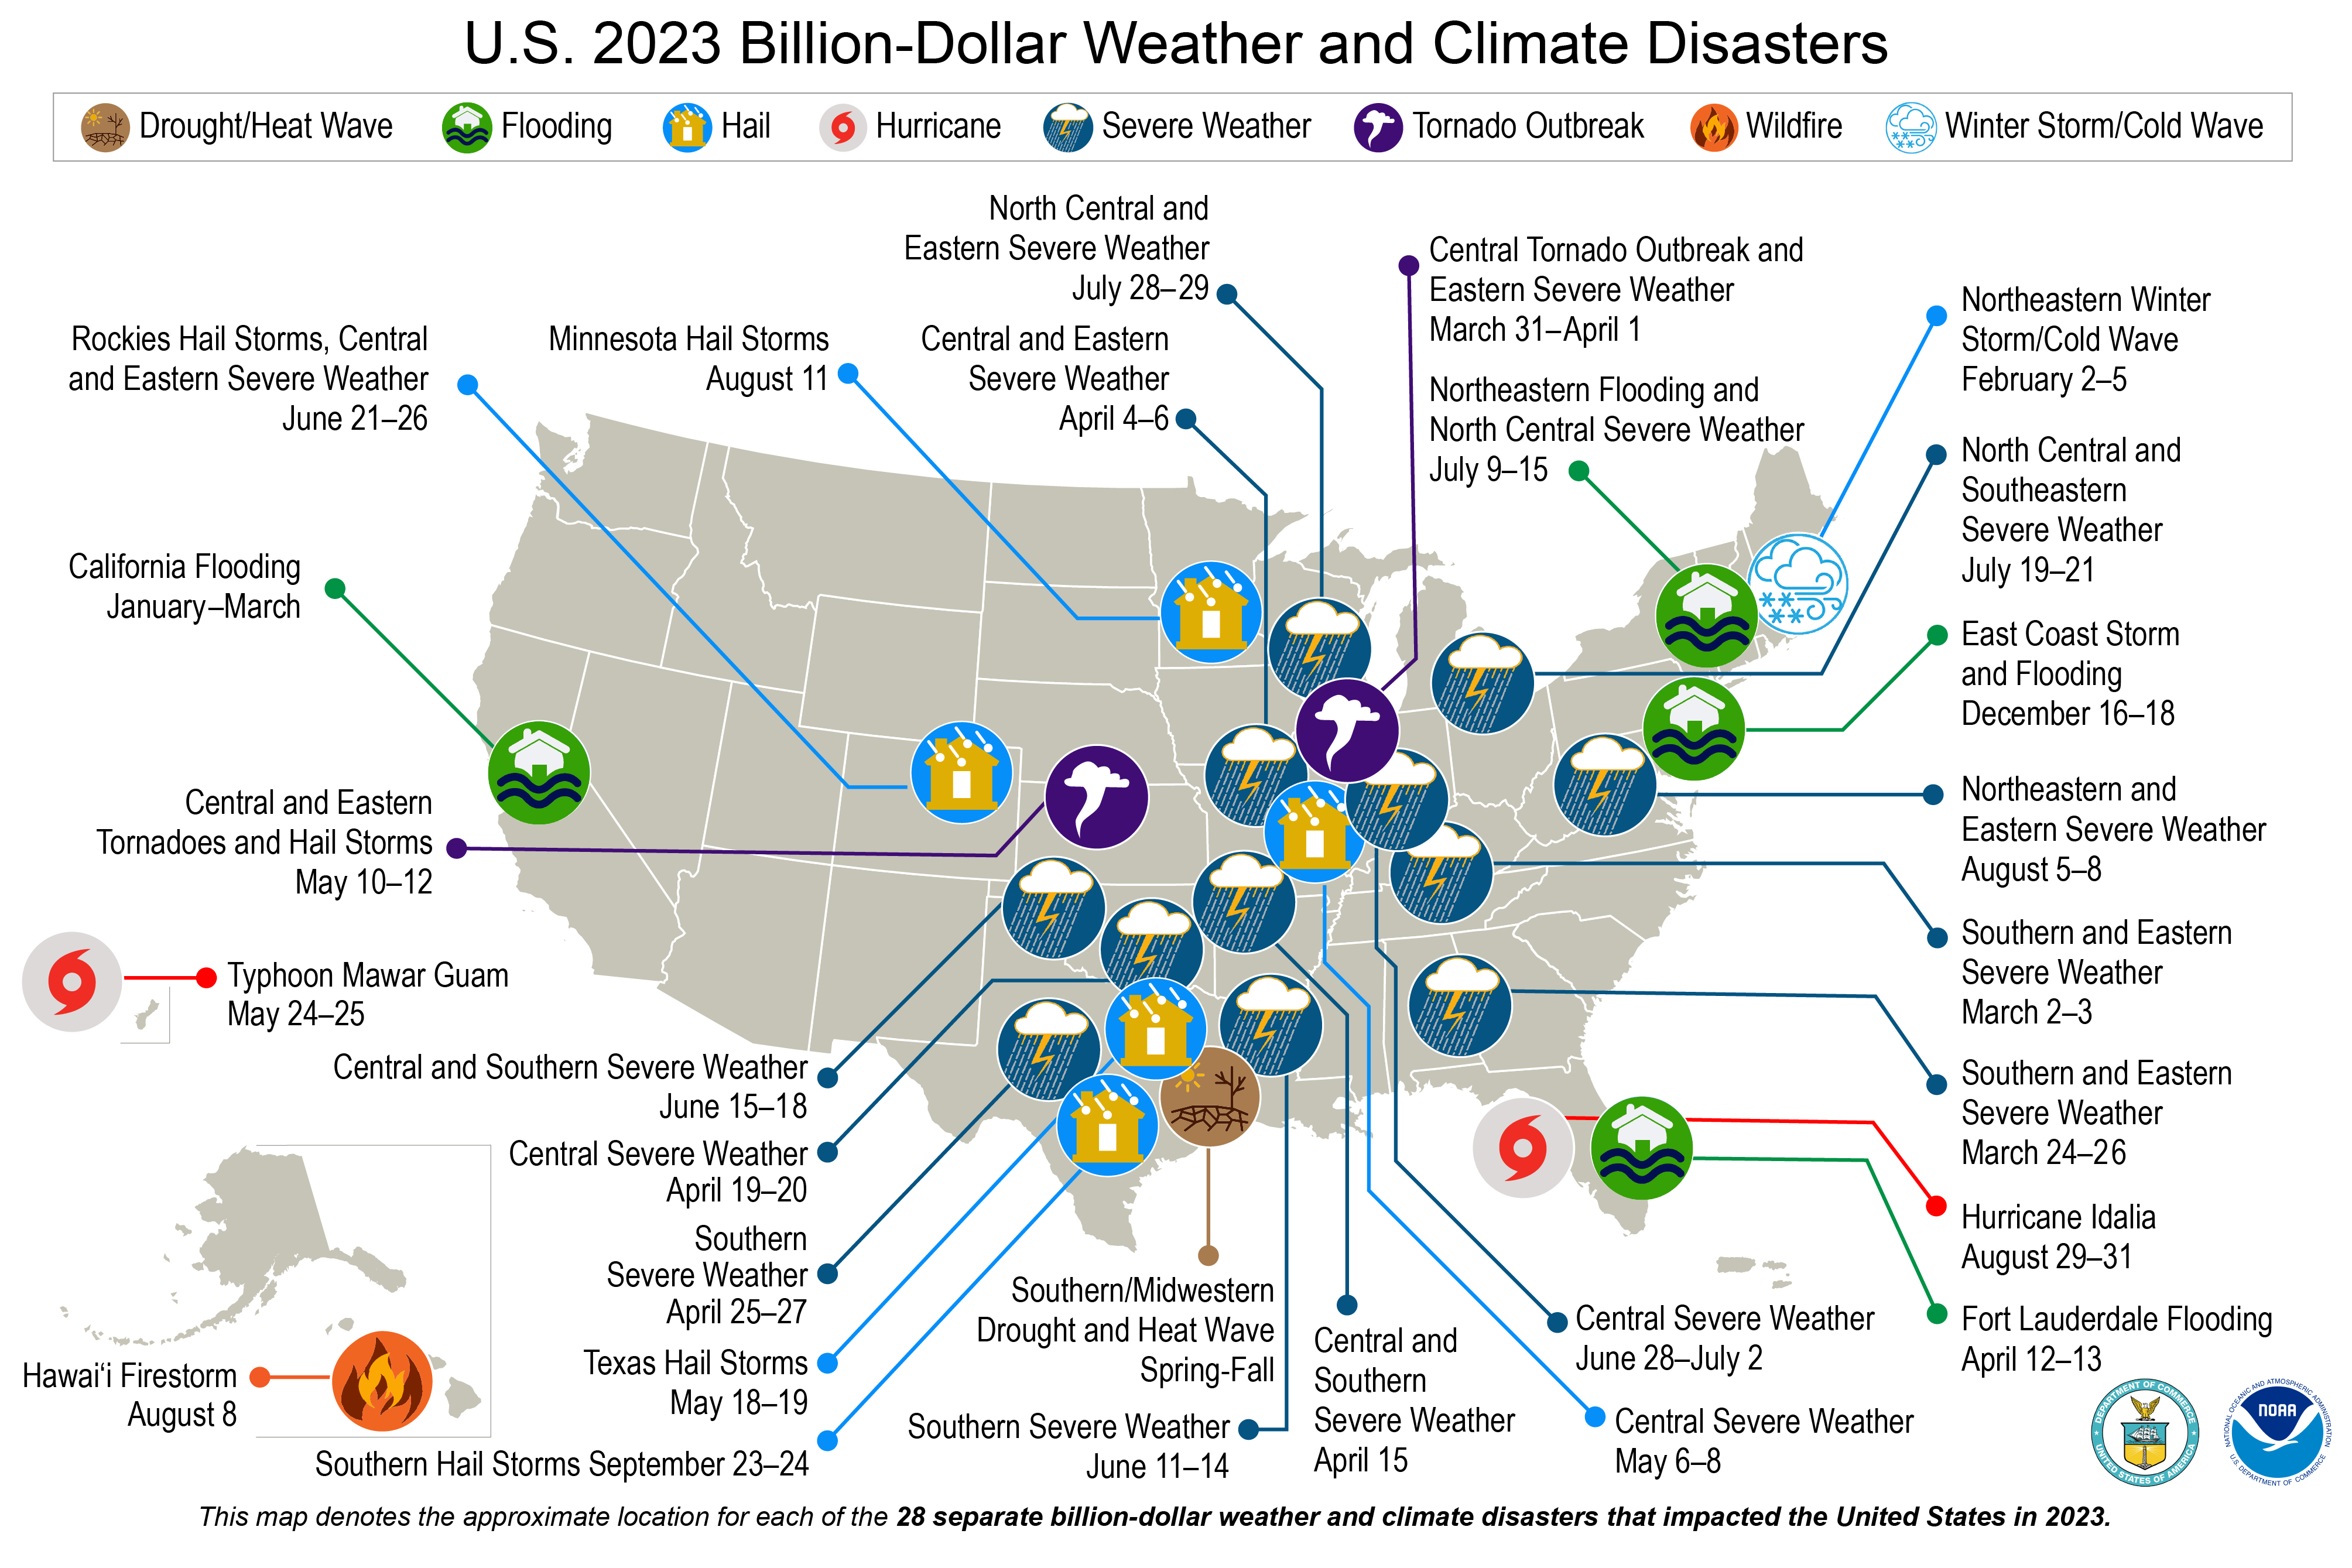 Billion-dollar weather and climate disasters